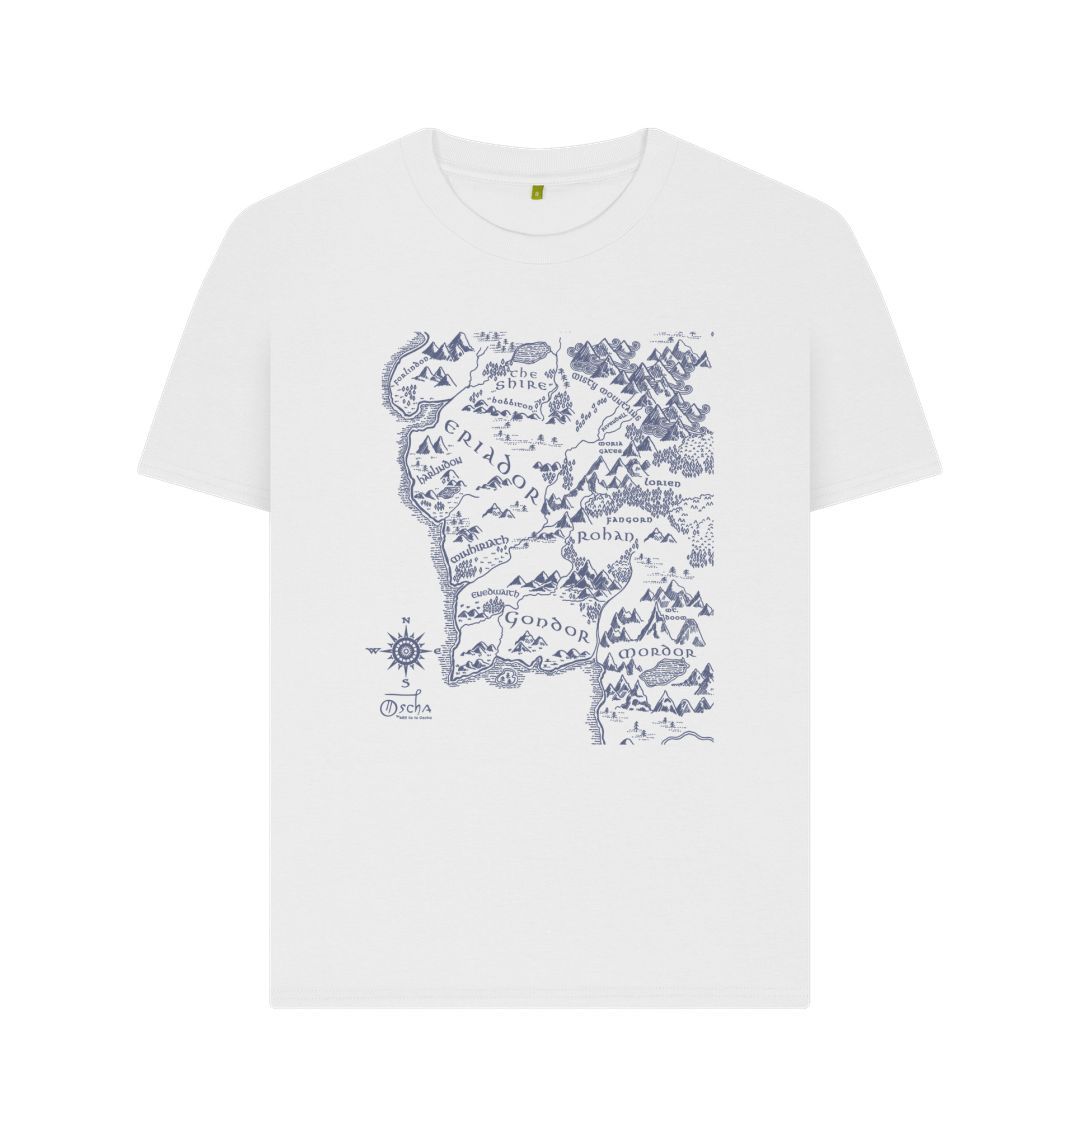 White Realm of MIDDLE-EARTH\u2122 Women's T-shirt